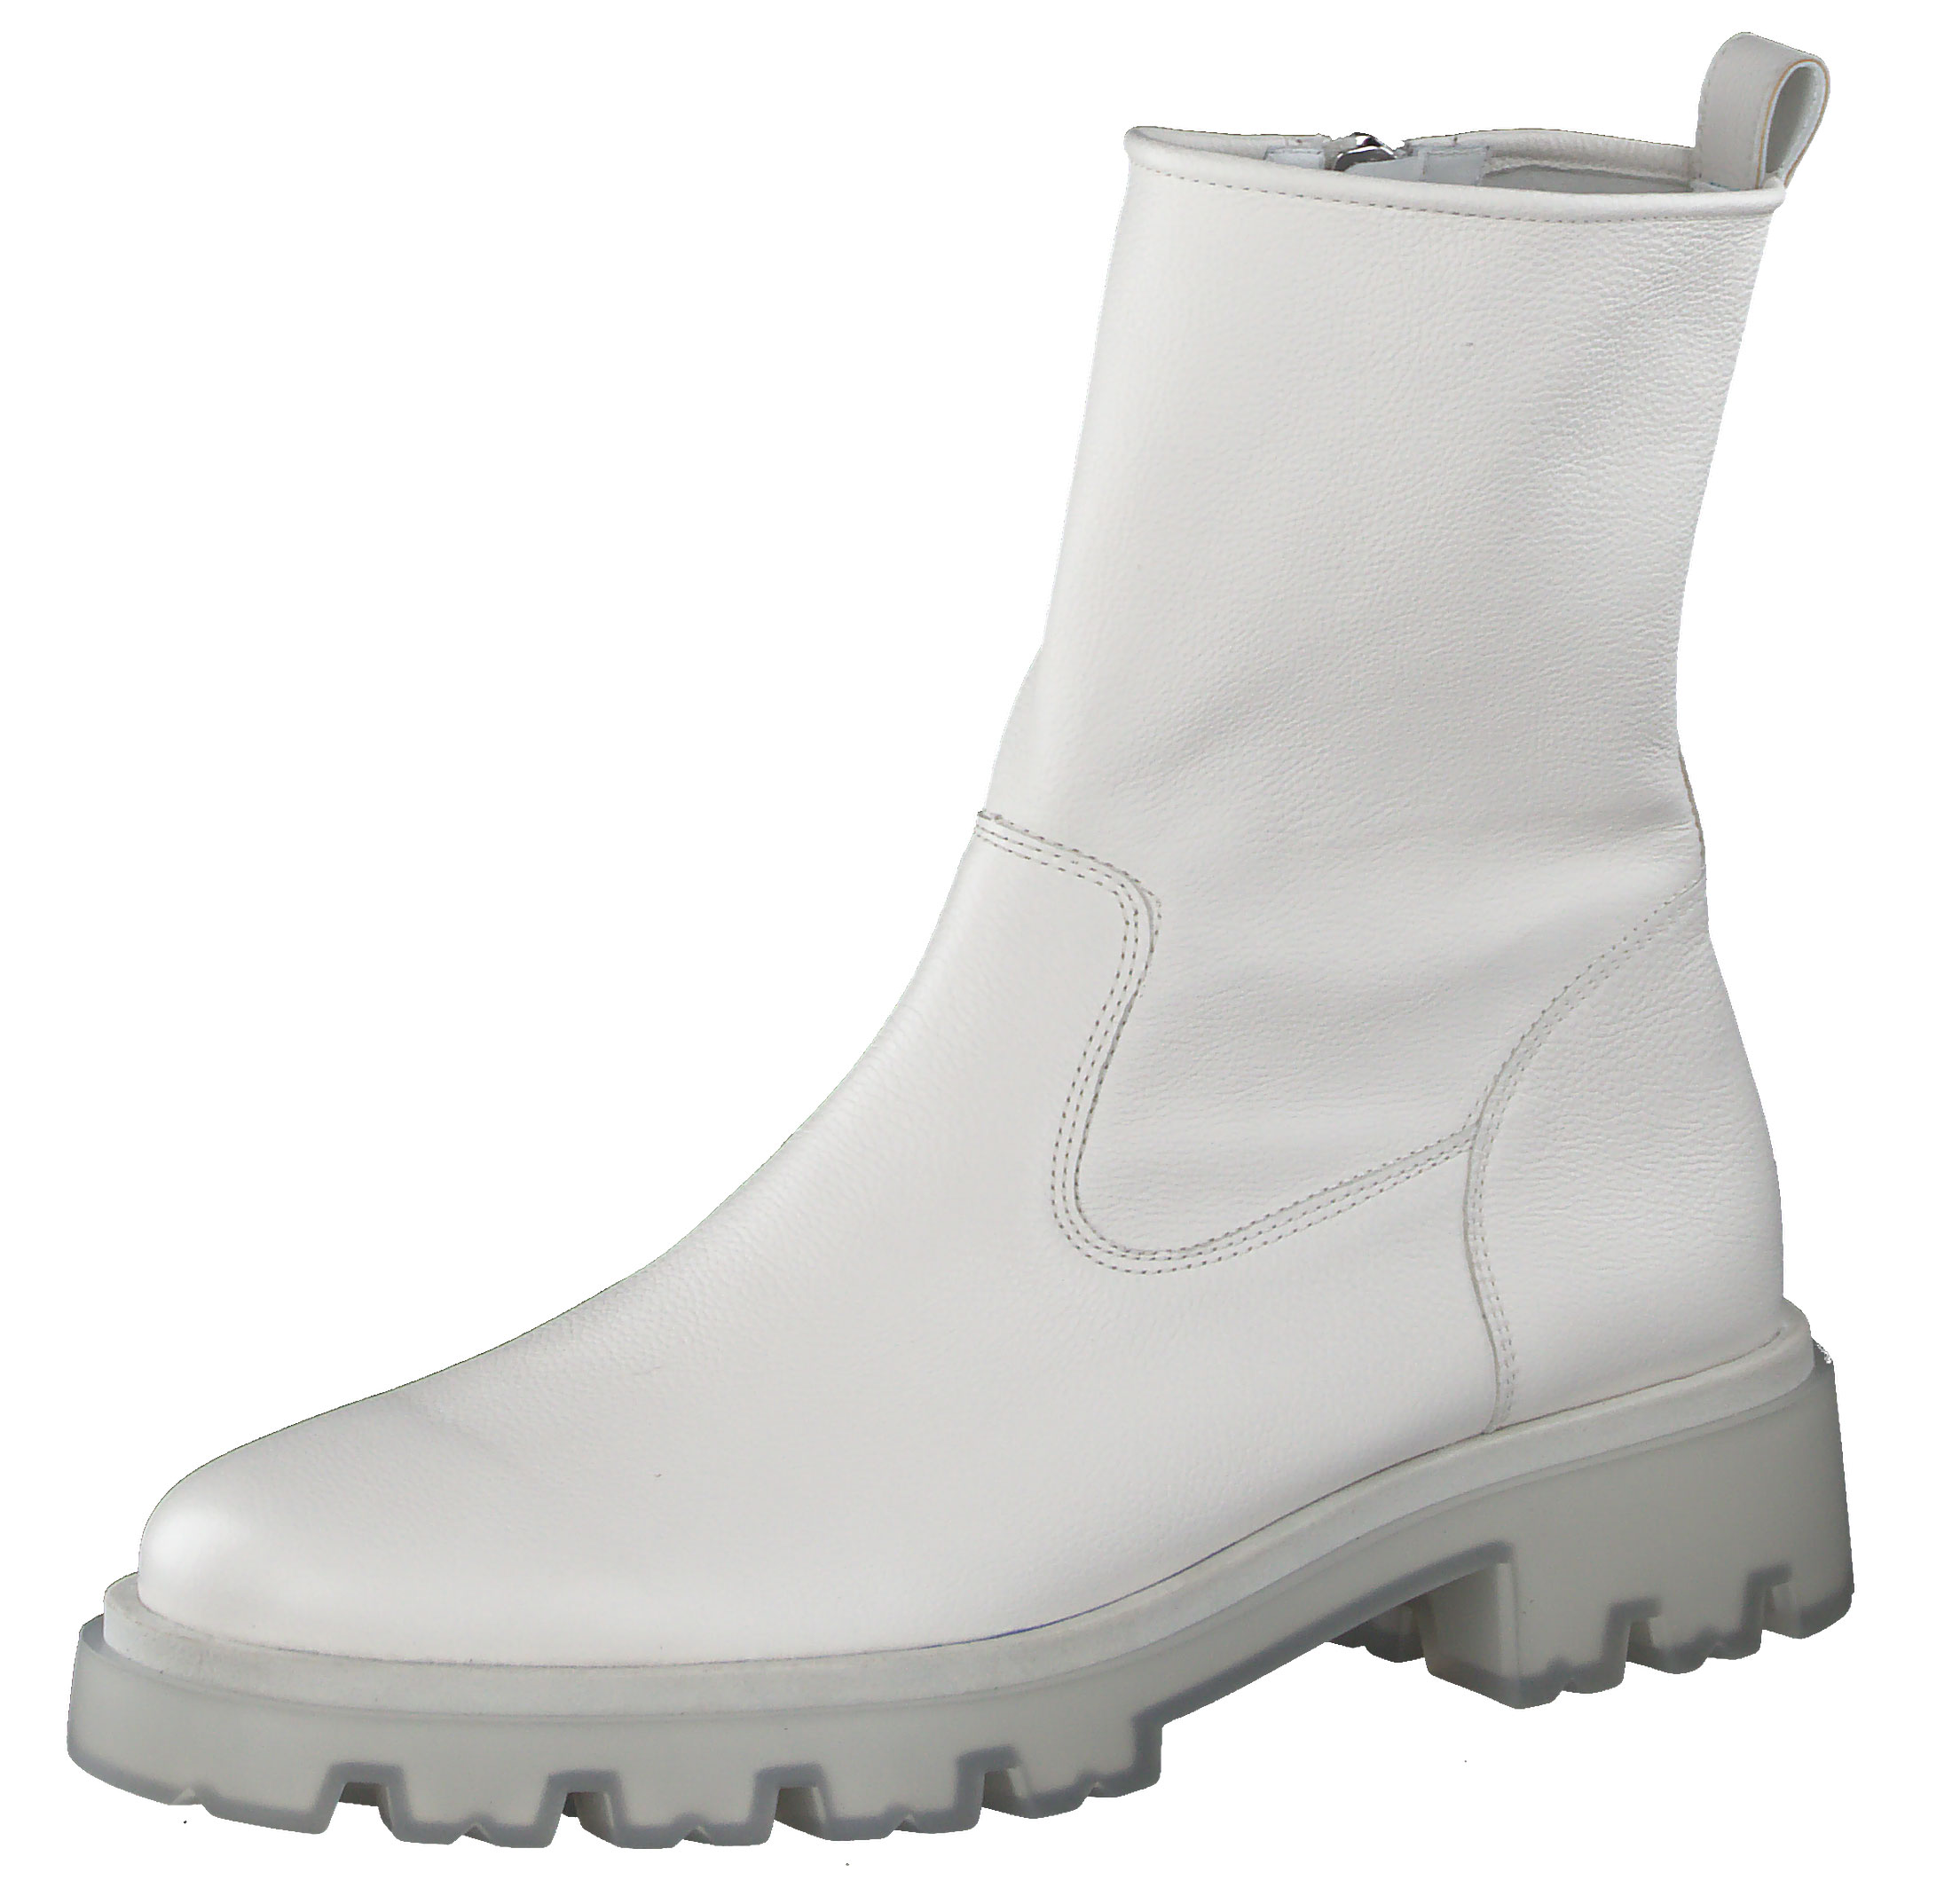 Stiefelette - White smooth leather